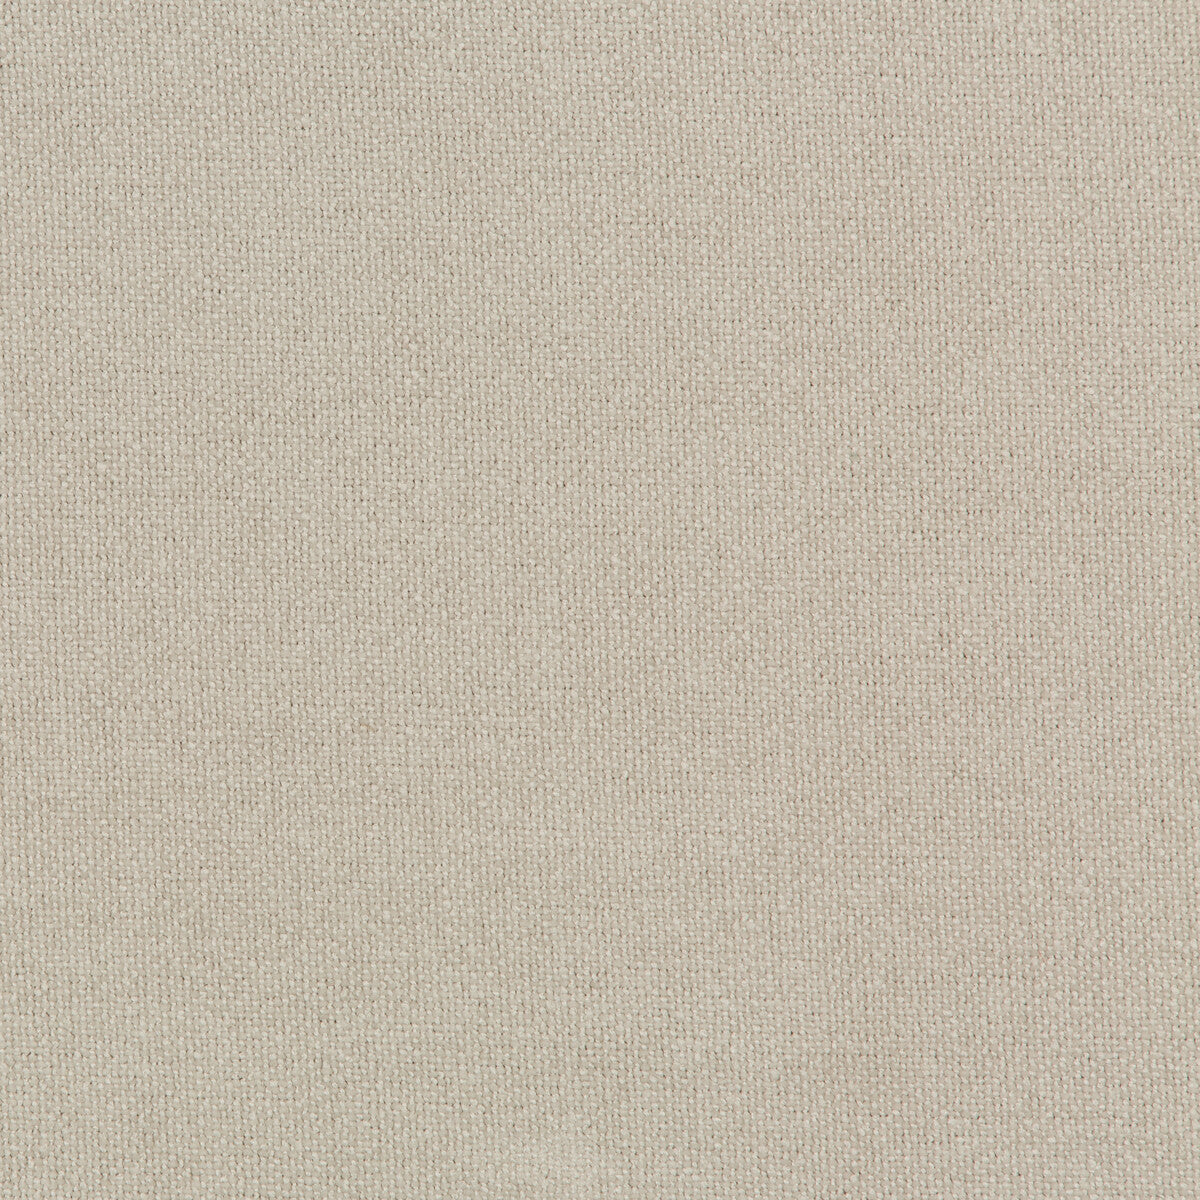 Kravet Smart fabric in 35988-11 color - pattern 35988.11.0 - by Kravet Smart in the Performance Crypton Home collection